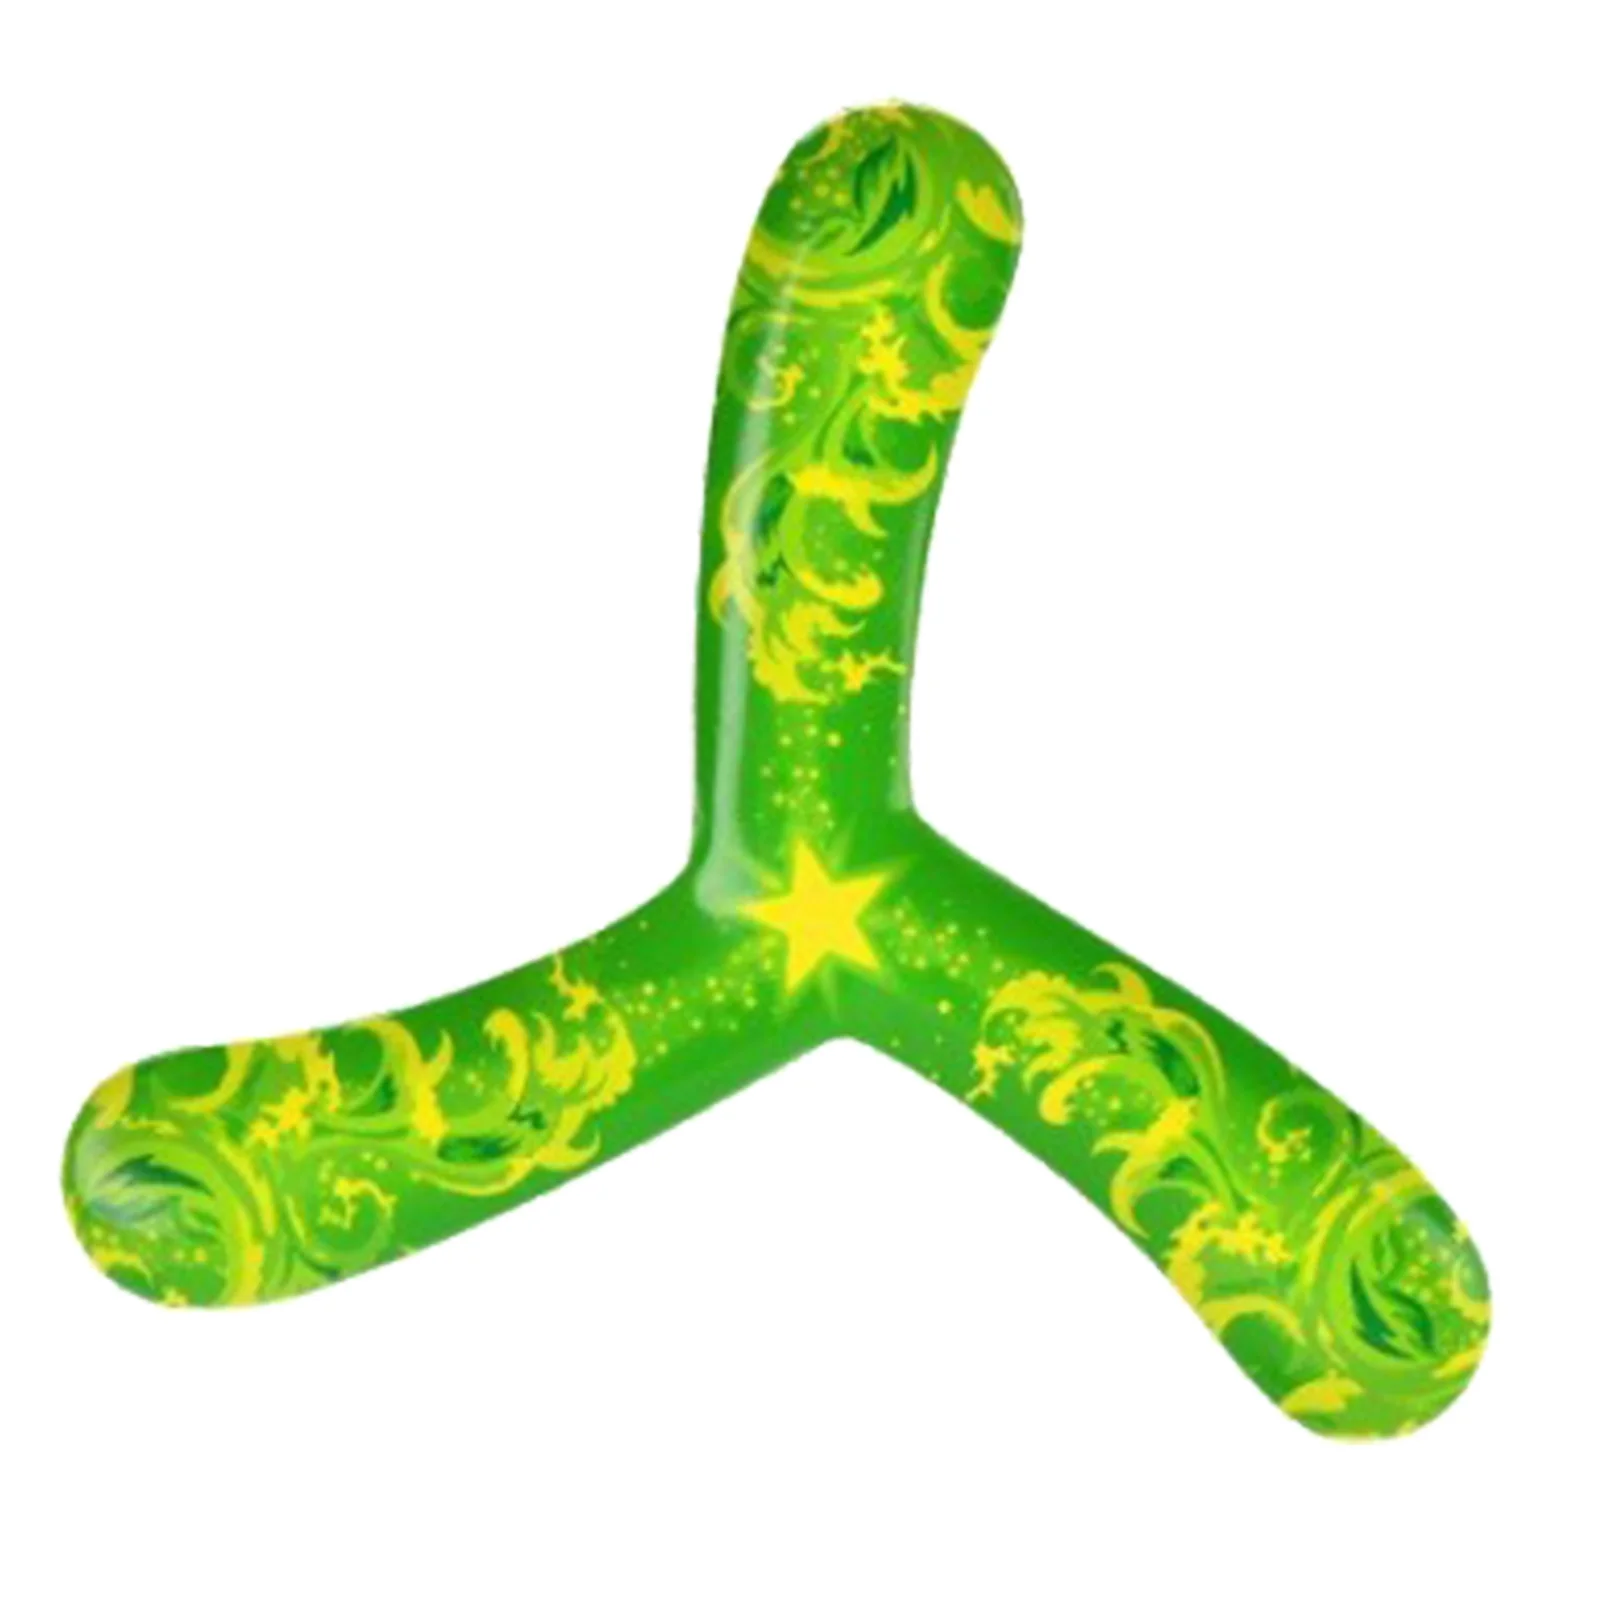 Outdoor Boomerangs Sports Toys for Kids 3 Blade Design Easy to Throw Soft Boomerangs for Athletes for Sports Game Toy